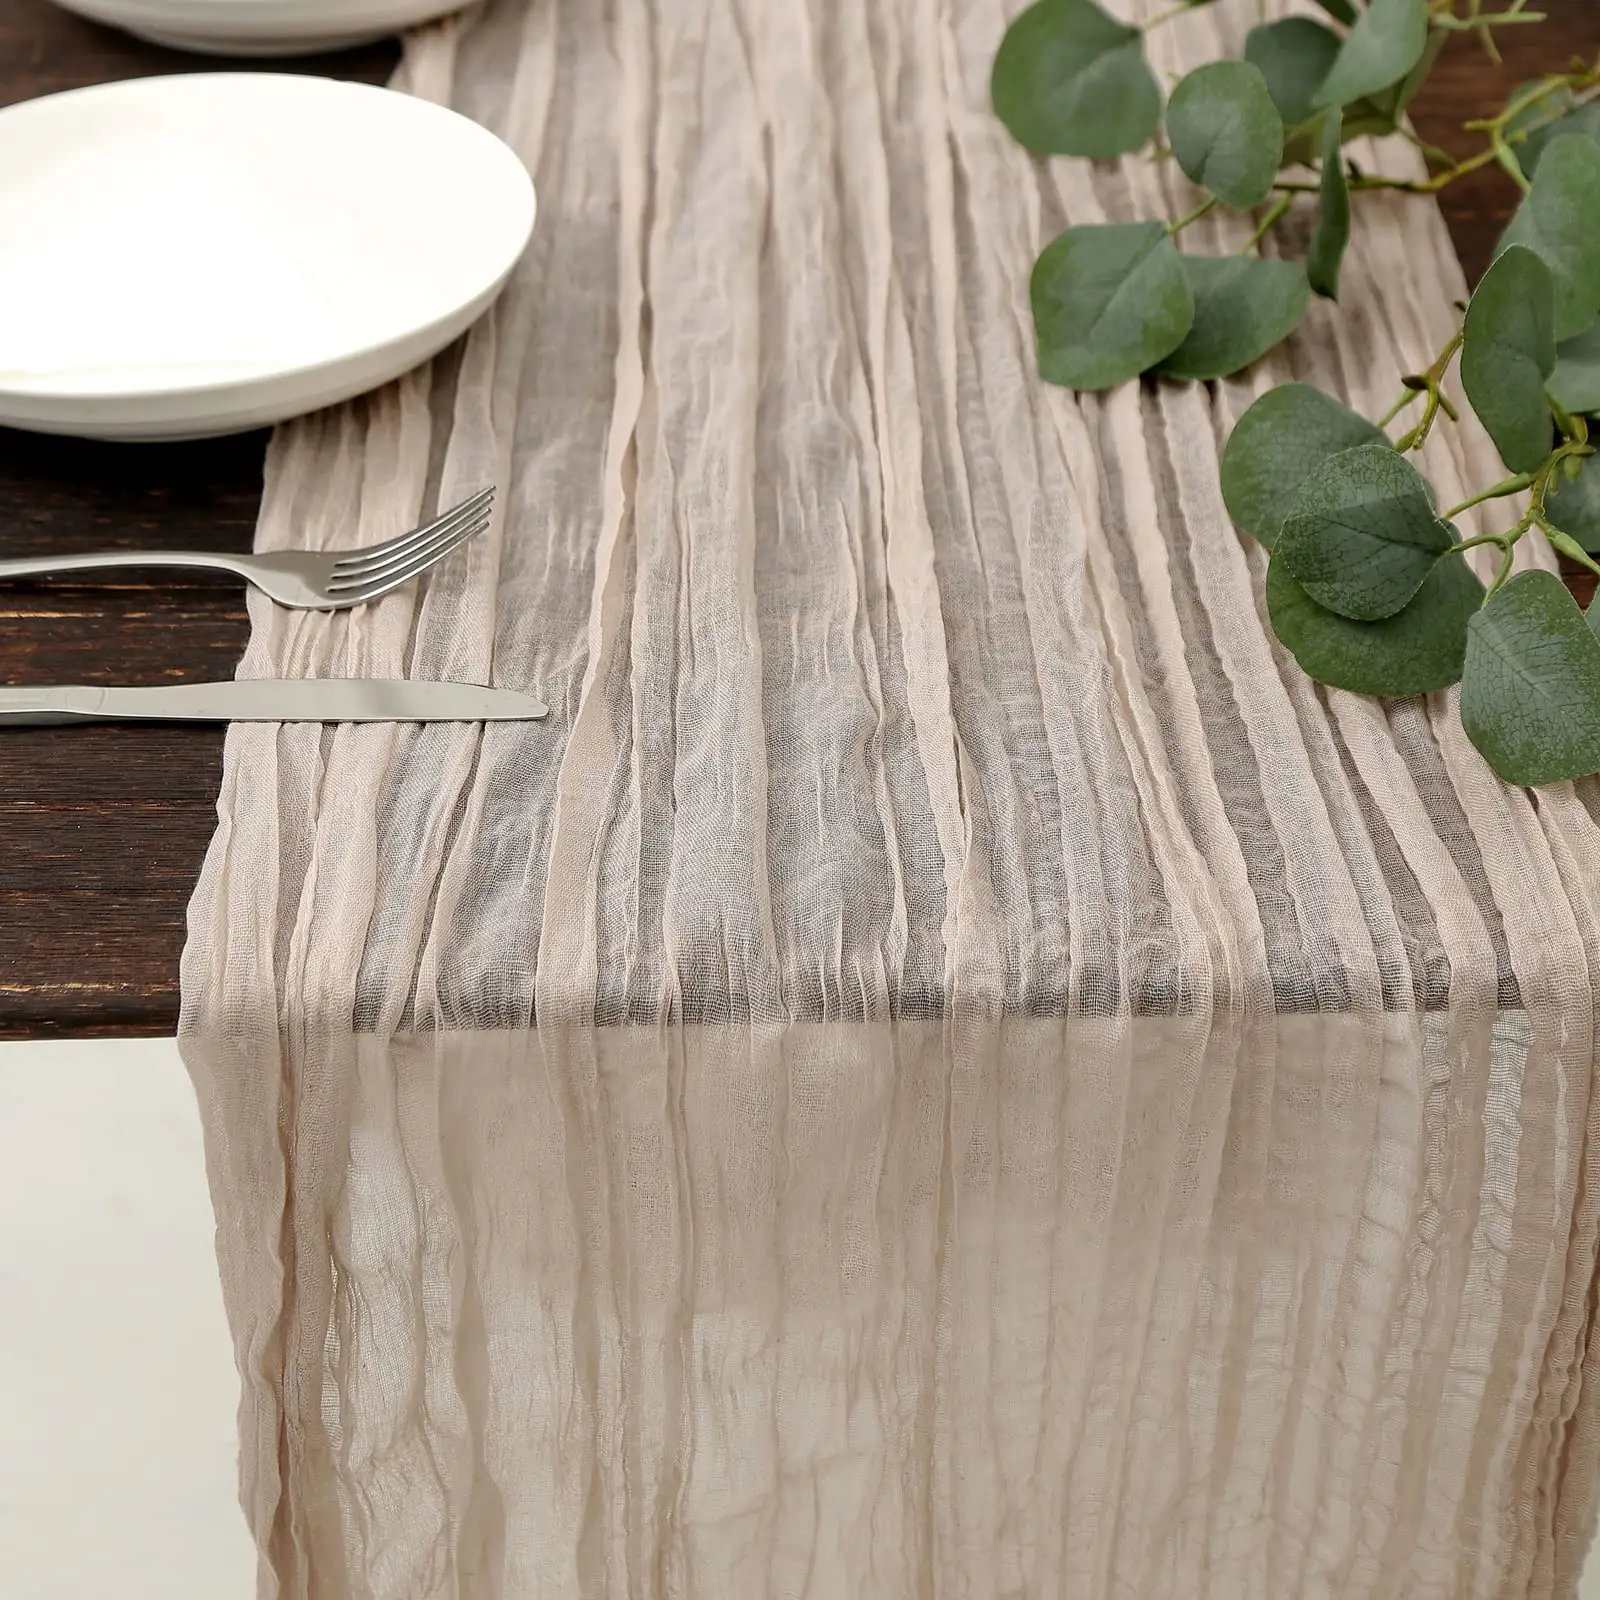 Farmhouse sage green table runner solid gauze table runner cheesecloth table runner for wedding party